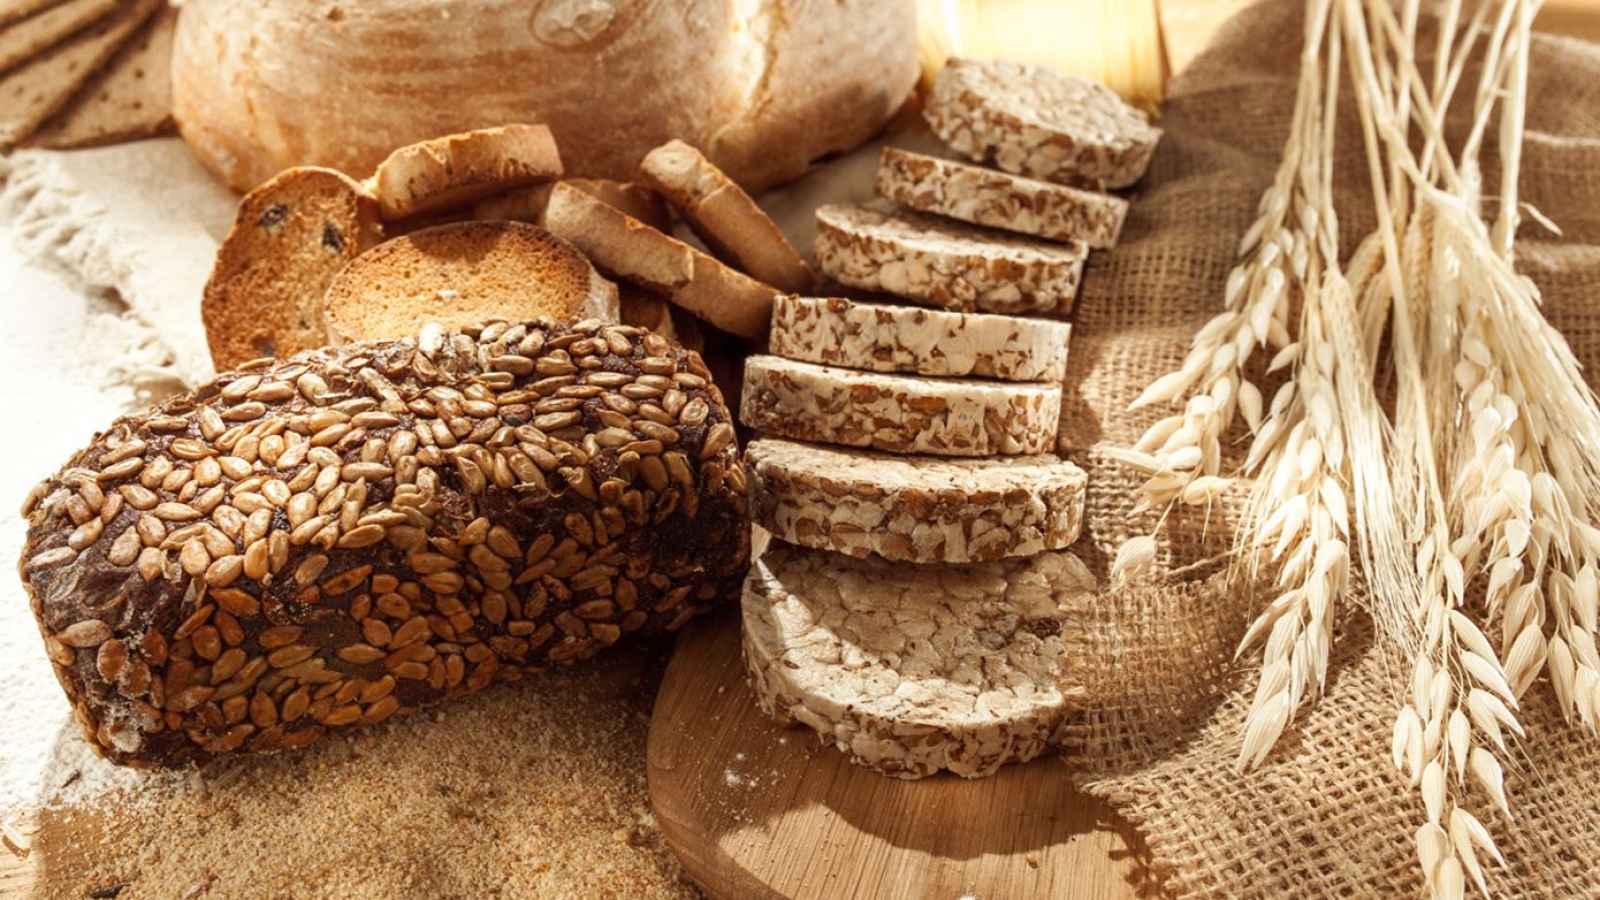 gluten-free-food-various-pasta-bread-snacks-wooden-background-from-top-view2-min